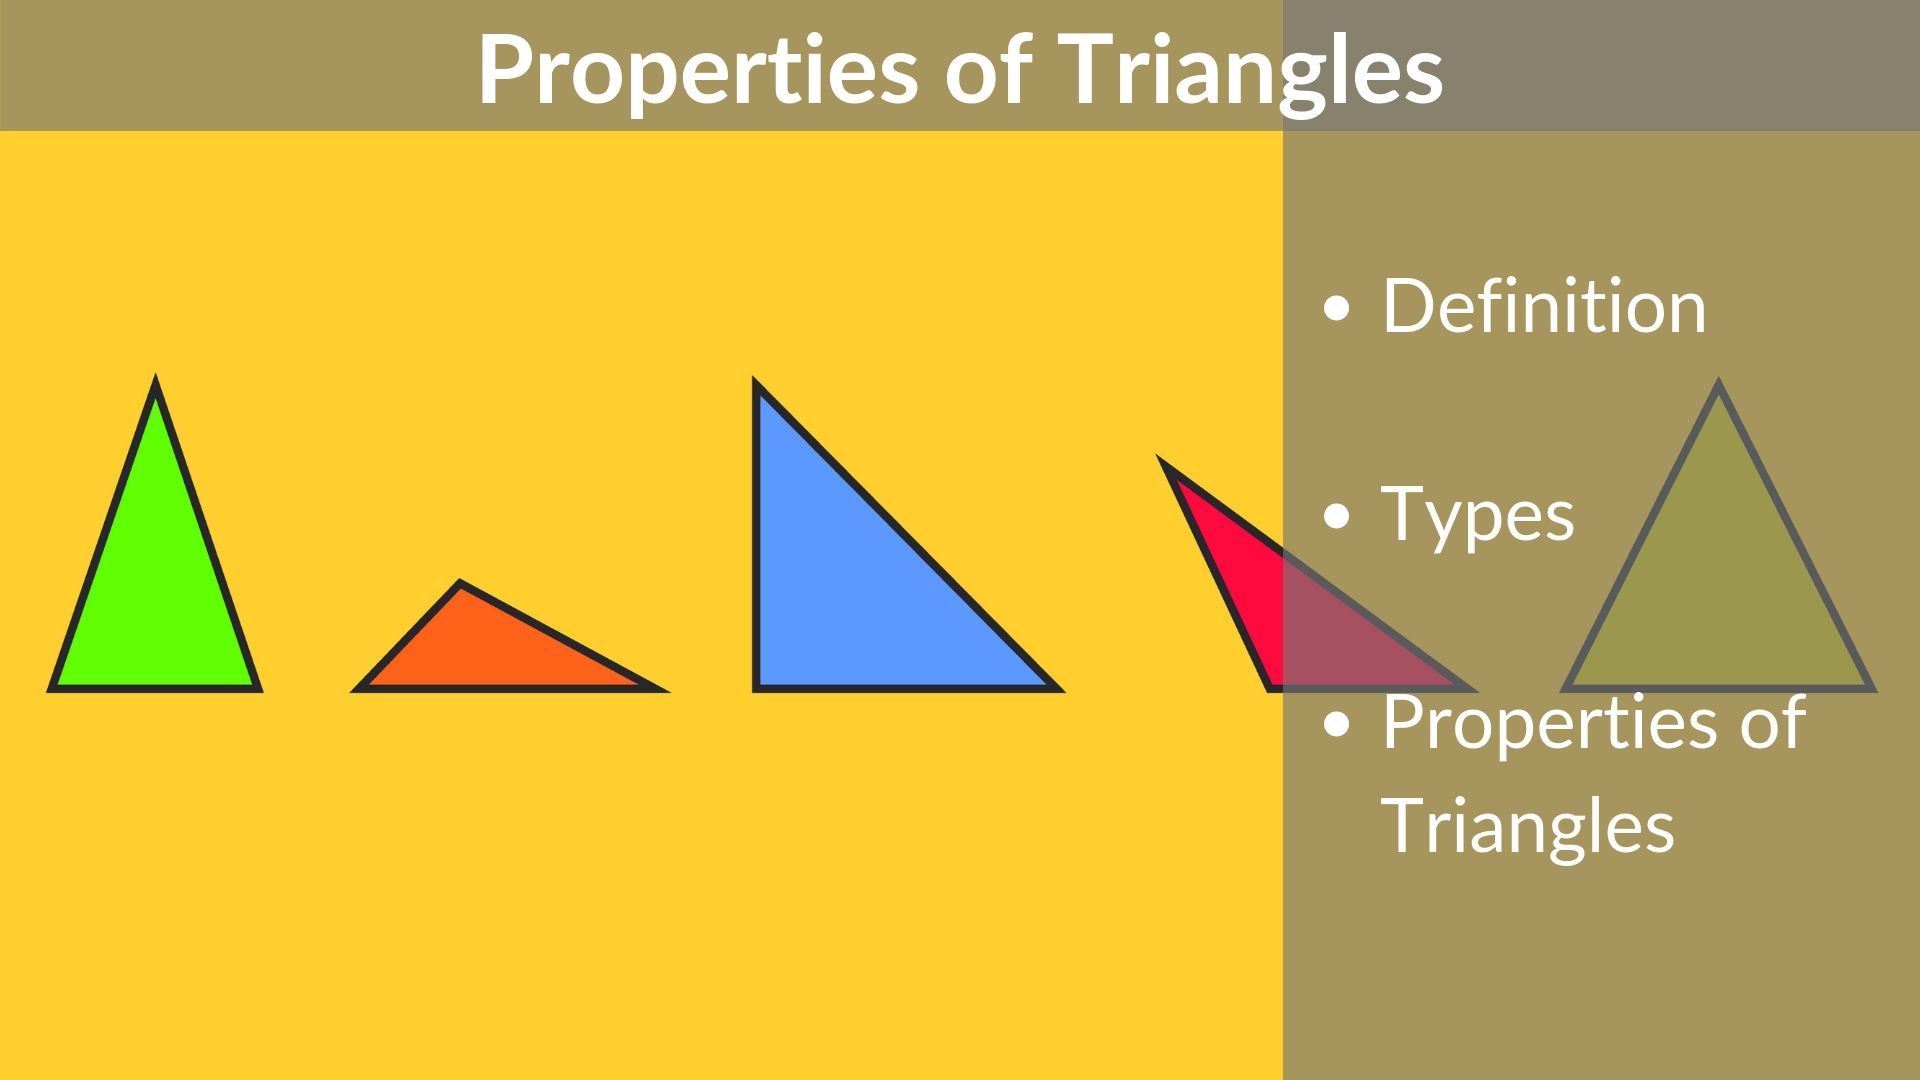 Properties of triangles - Classification of Triangles